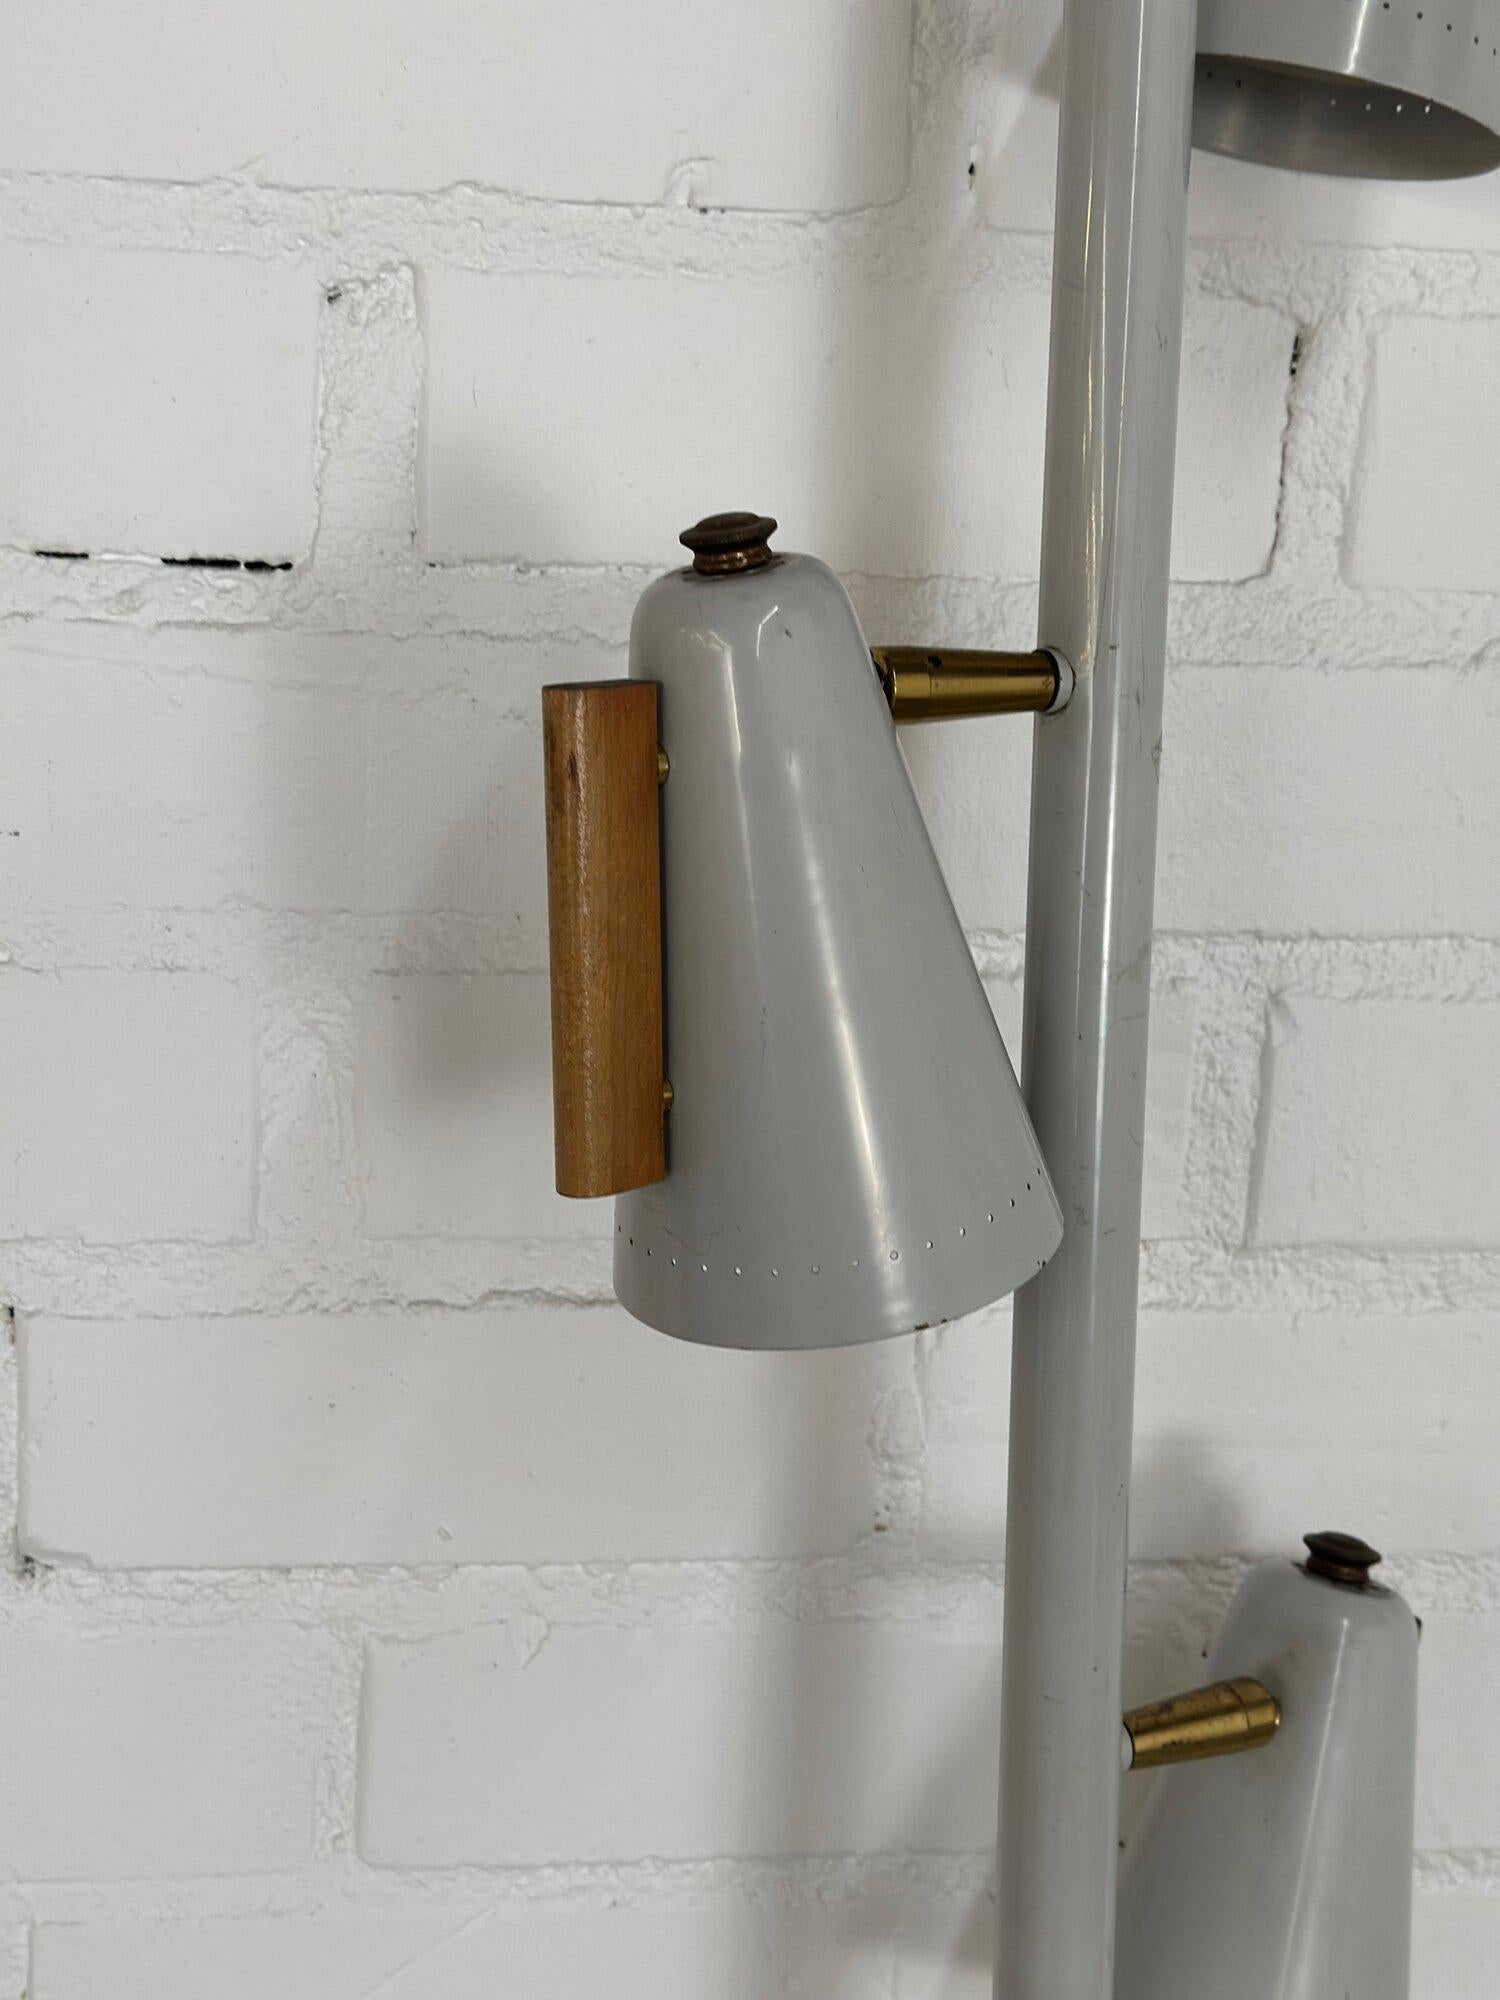 H100 D20

Vintage mid century tensions floor lamp with a nice industrial feel. Item shows well overall with minimal patina and original finish still well preserved. Lamp is structurally sound and fully functional.